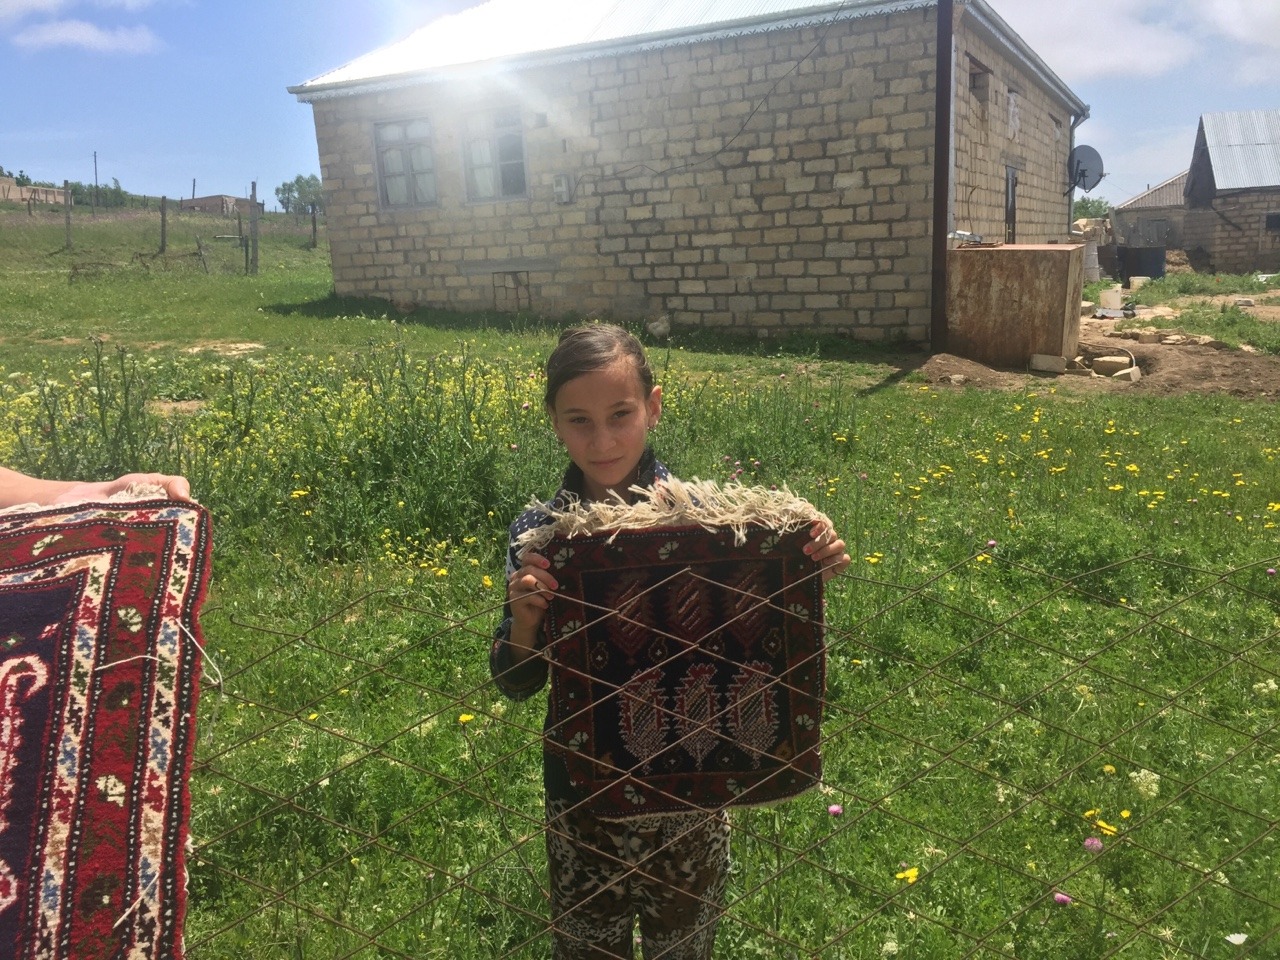 Above is the first carpet weaver that we met. She is thirteen years old and has been helping her mother weave since she was eight years old. She is holding up a piece that she made herself. Remarkably, this was the one family we met who did not use a...